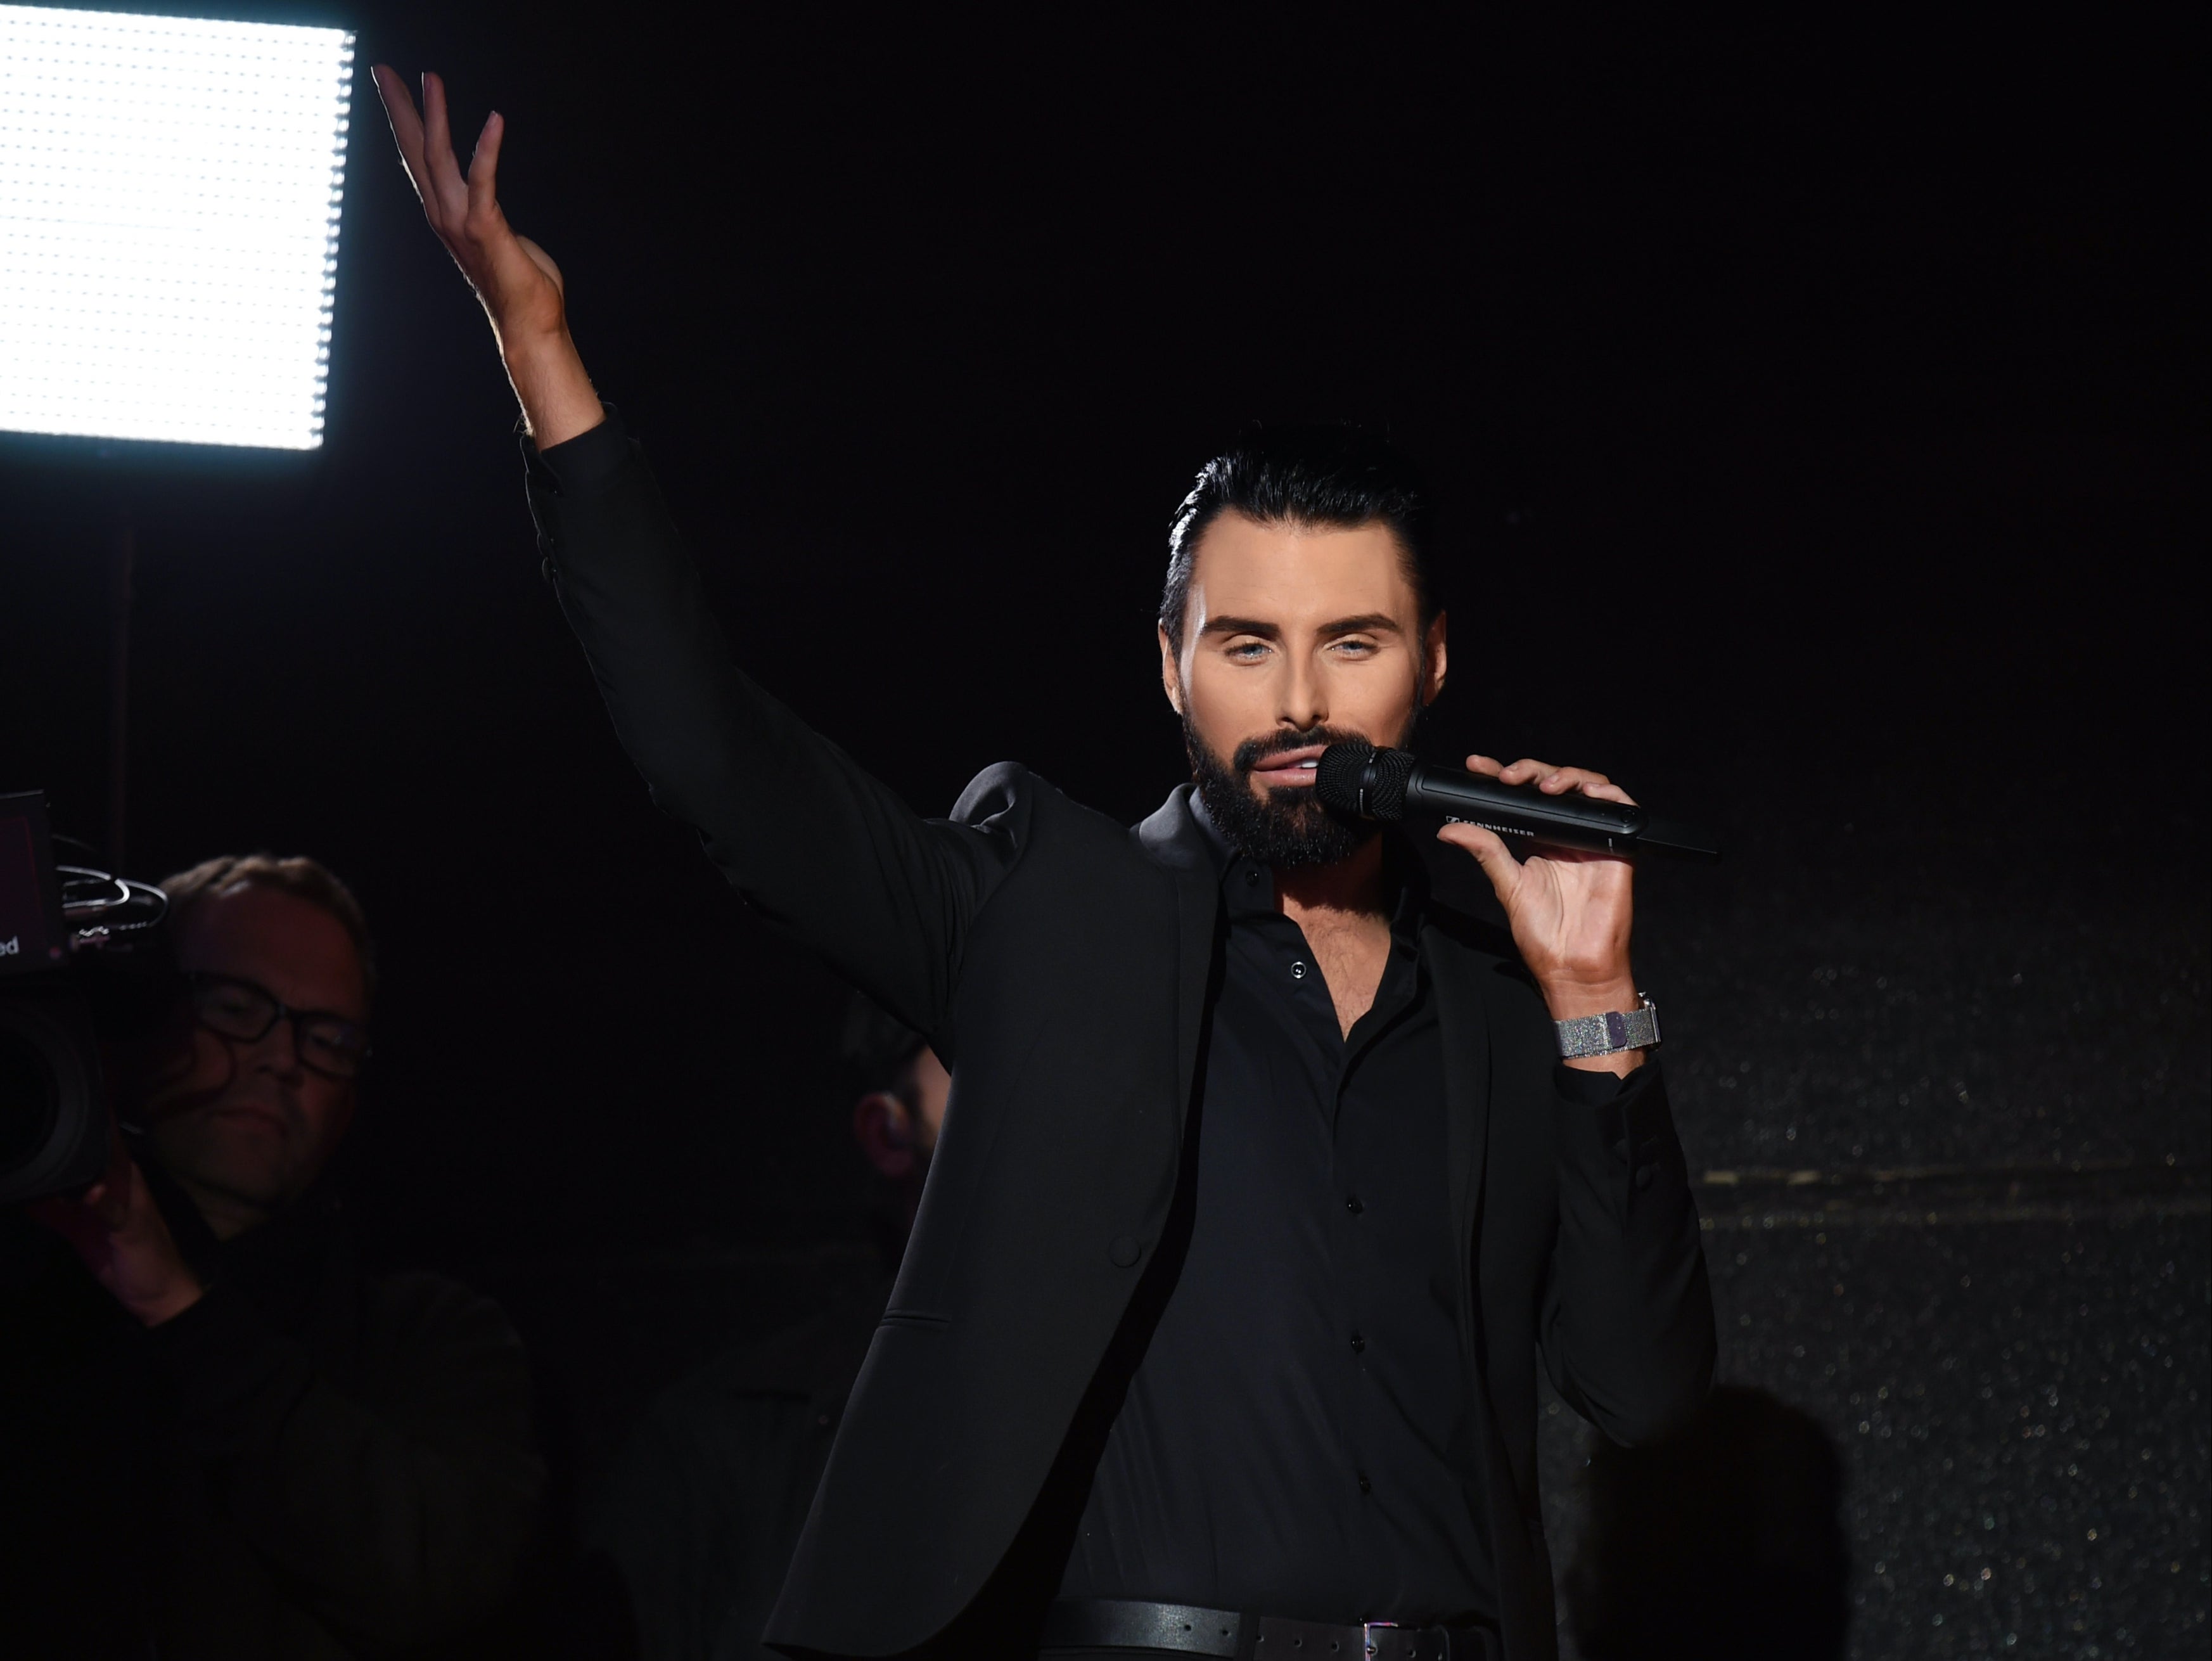 Rylan Clark-Neal during the final of Celebrity Big Brother in 2013